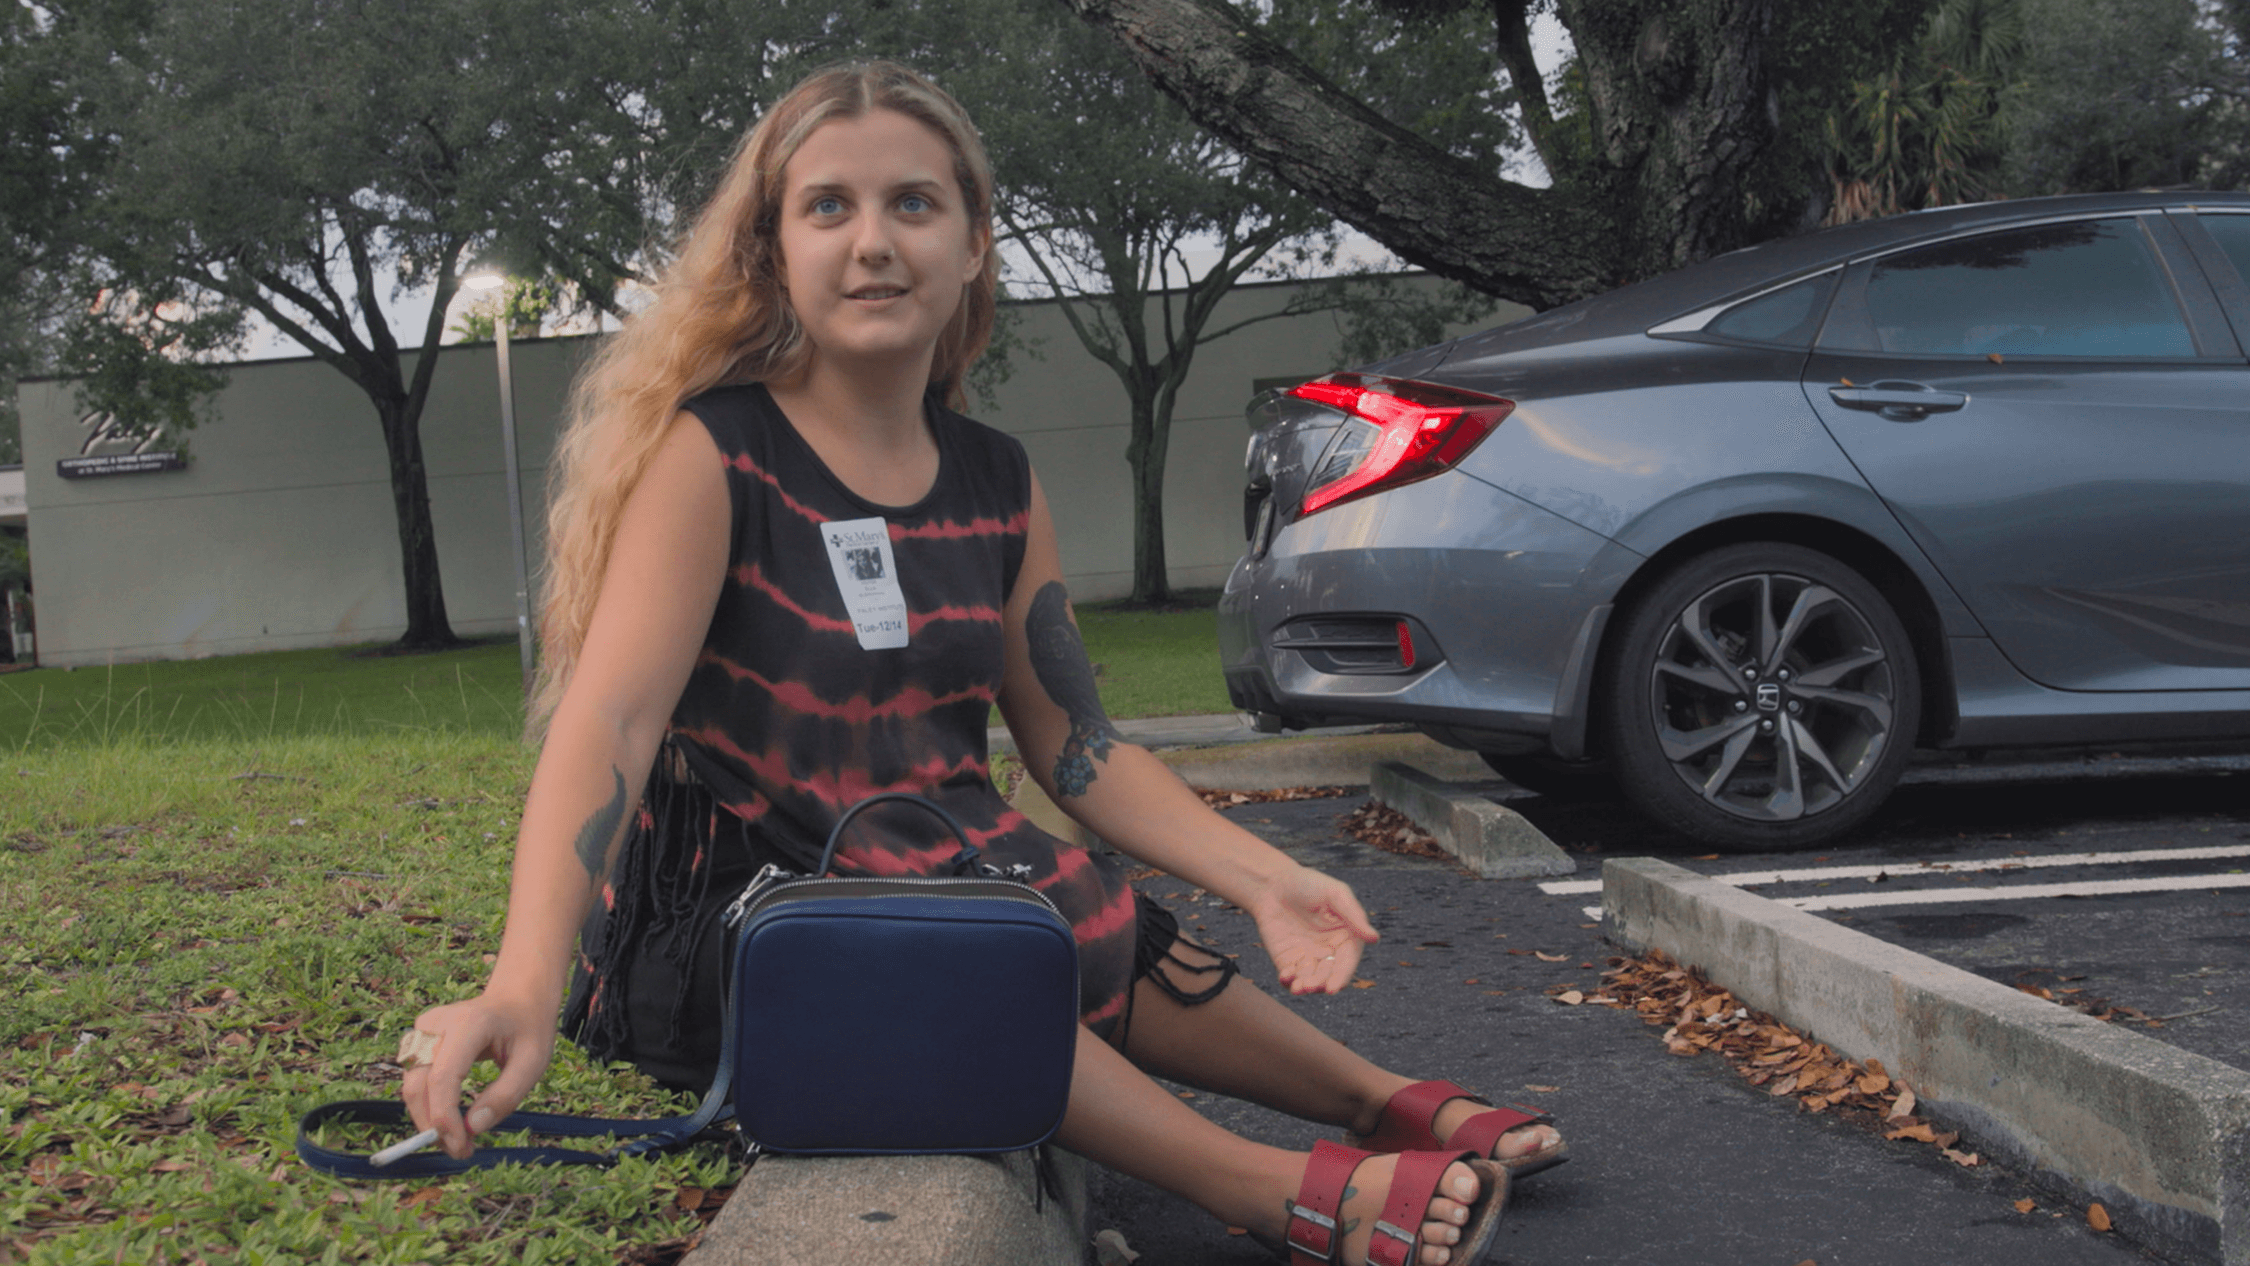 A person is seated on a curb in a parking lot, wearing a tie-dye dress and sandals, with a small blue handbag next to them. They have a tattoo on their arm and are wearing a name tag sticker. The person looks off to the side with a thoughtful expression. Behind them, there is a car parked and trees that suggest the area could be near an office or a public building. The setting appears to be during the day with overcast weather.